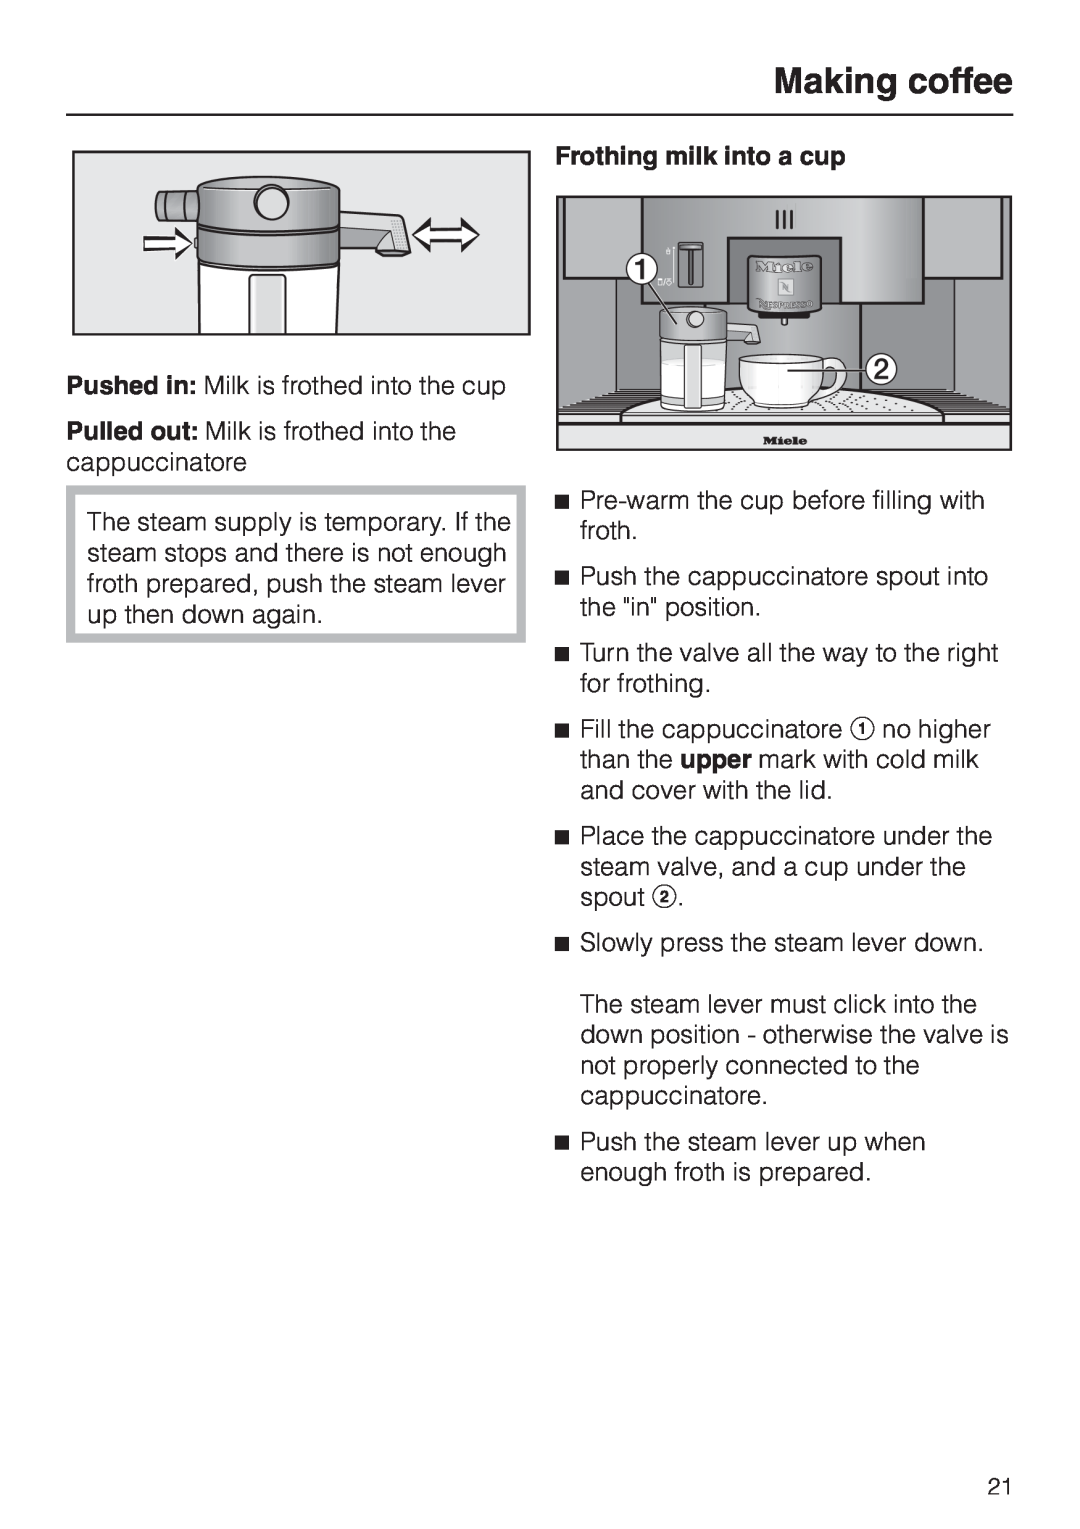 Miele CVA 2660 installation instructions Frothing milk into a cup, Making coffee 